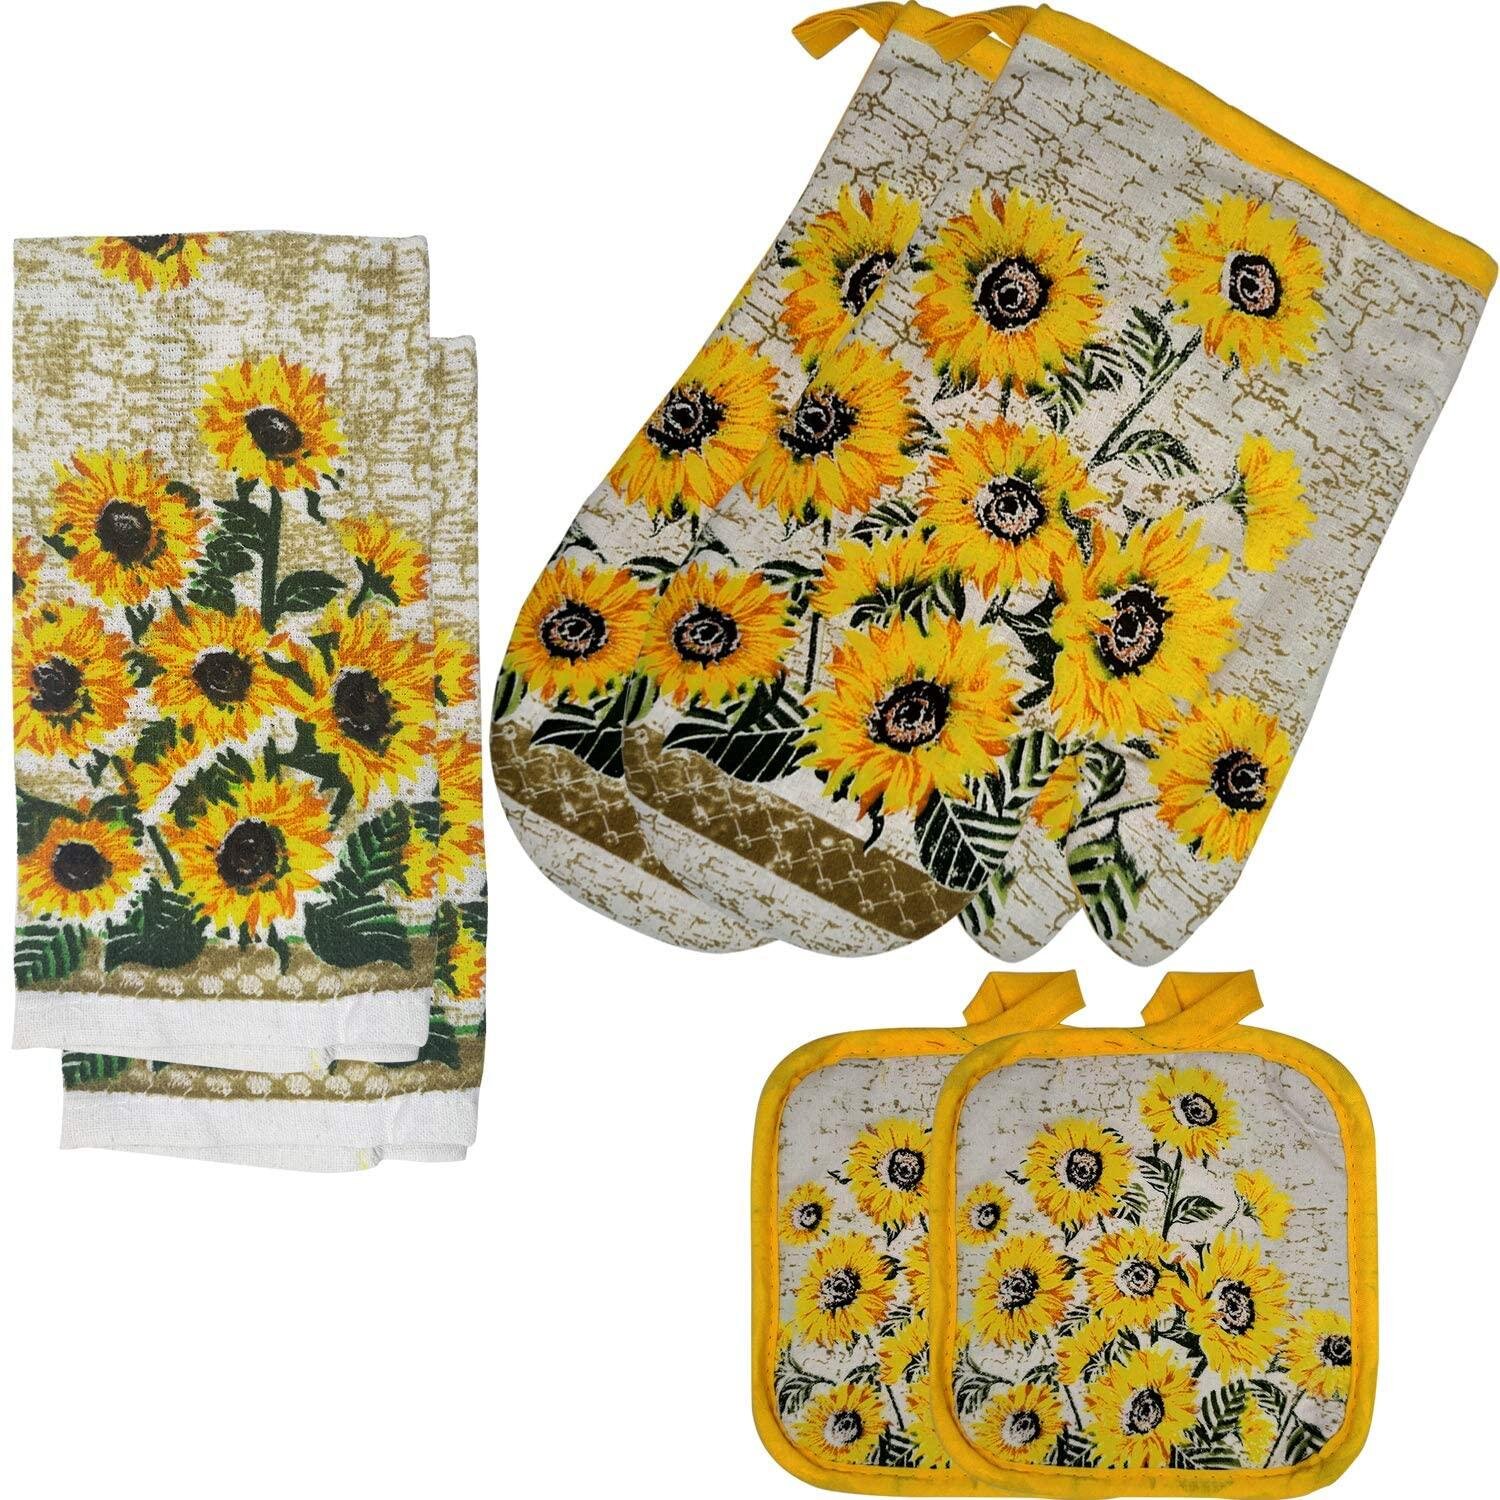 5 pc KITCHEN SET ROOSTER & SUNFLOWERS 2 POT HOLDERS,2 TOWELS & 1 OVEN MITT SL 